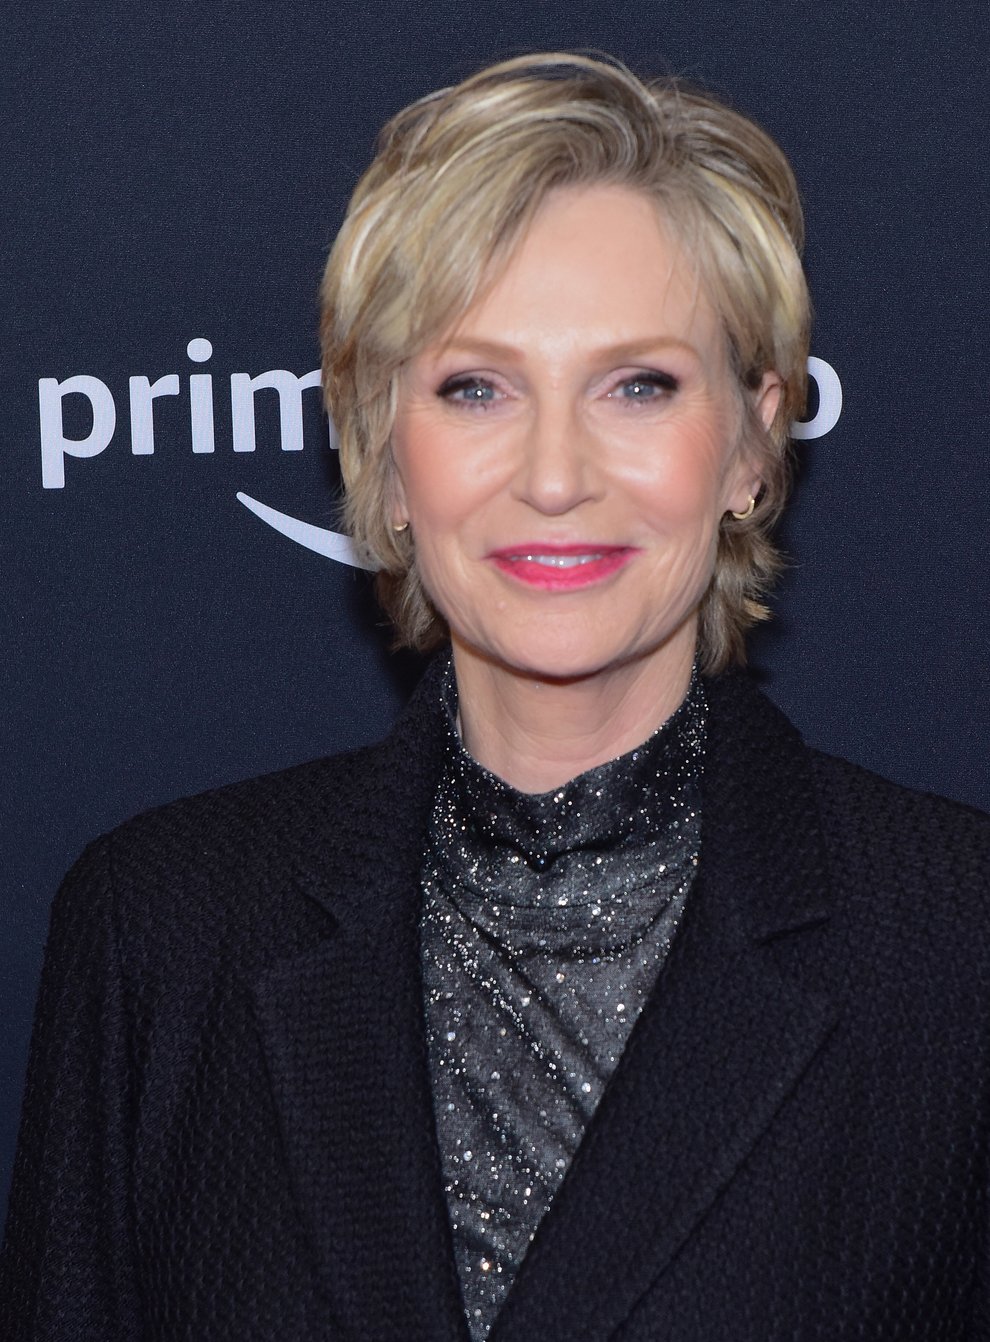 Jane Lynch is set to host a new version of The Weakest Link 